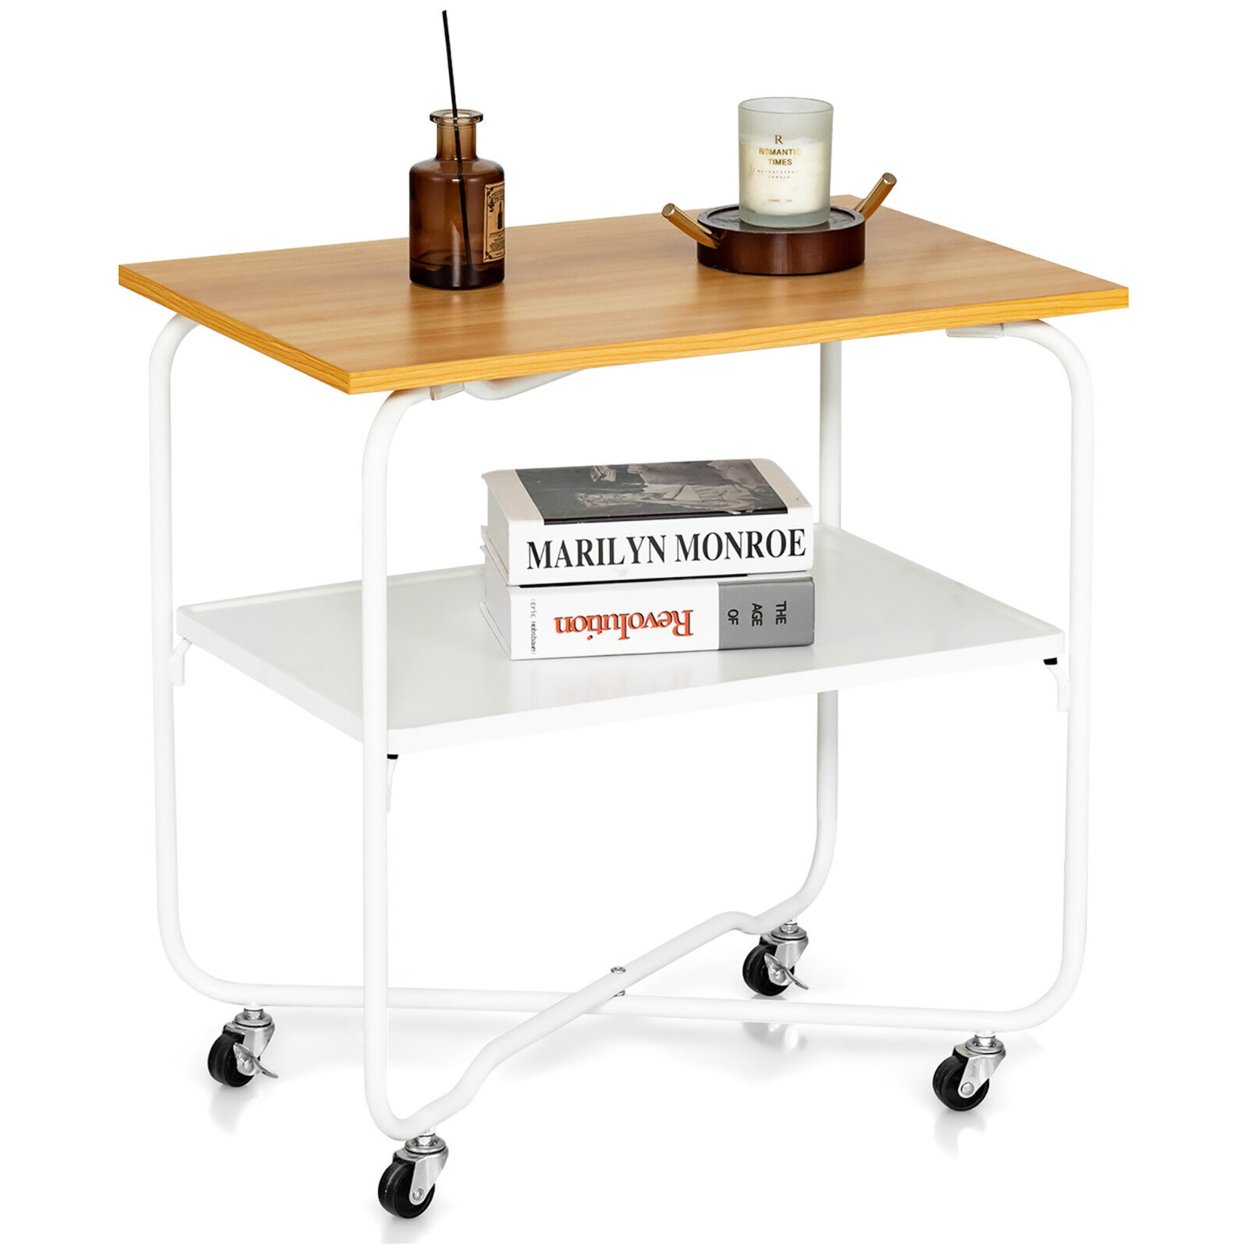 2-Tier Folding Rolling Cart Kitchen Utility Cart Tool-Free Installing - White + Natural